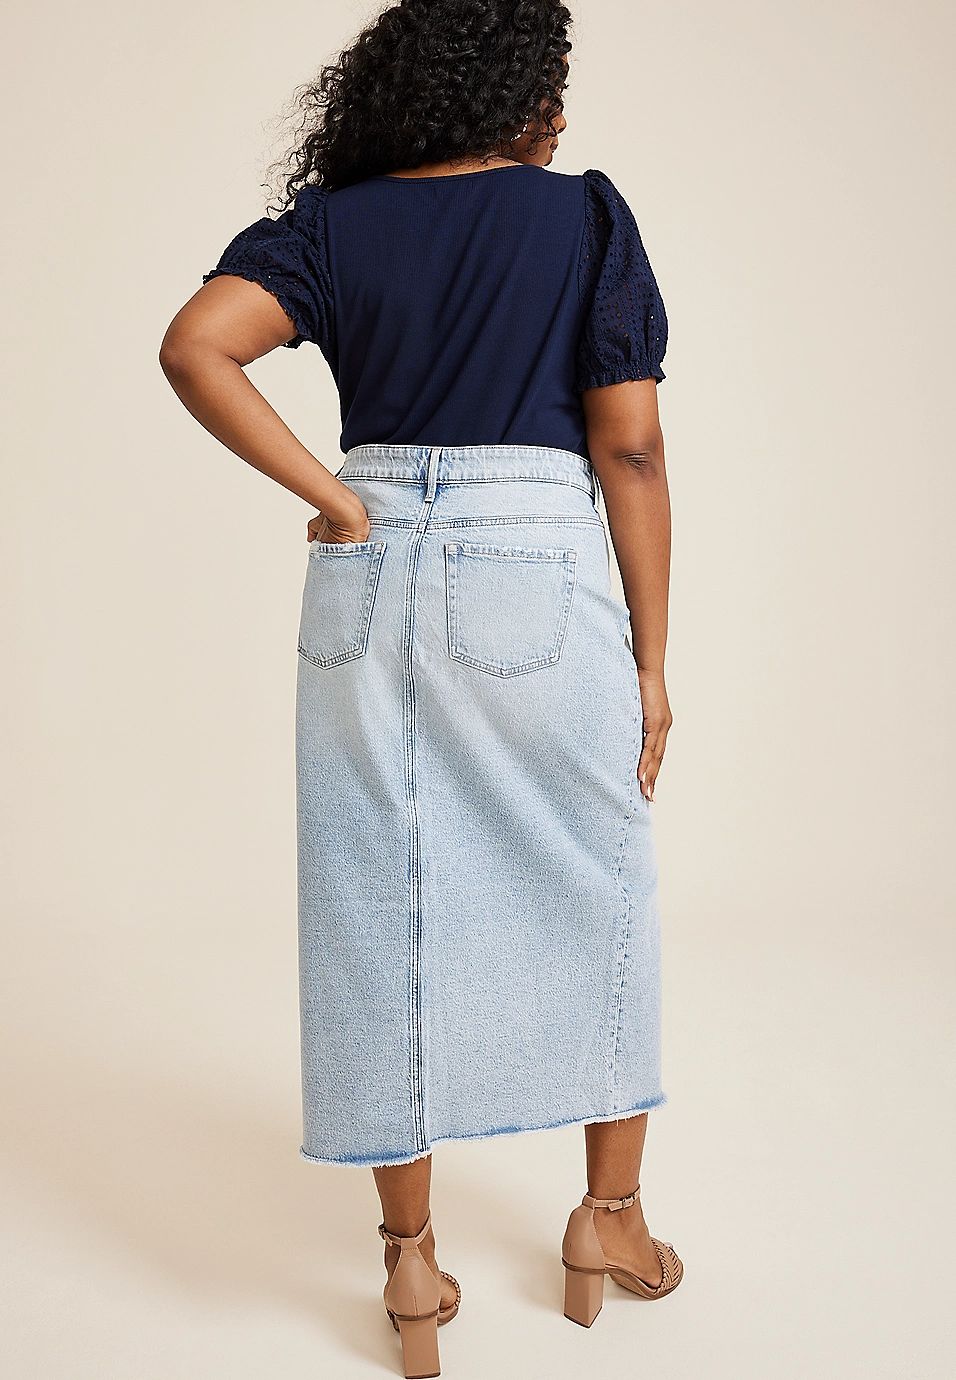 Plus Size m jeans by maurices™ Light High Rise Nonstretch Denim Maxi Skirt | Maurices